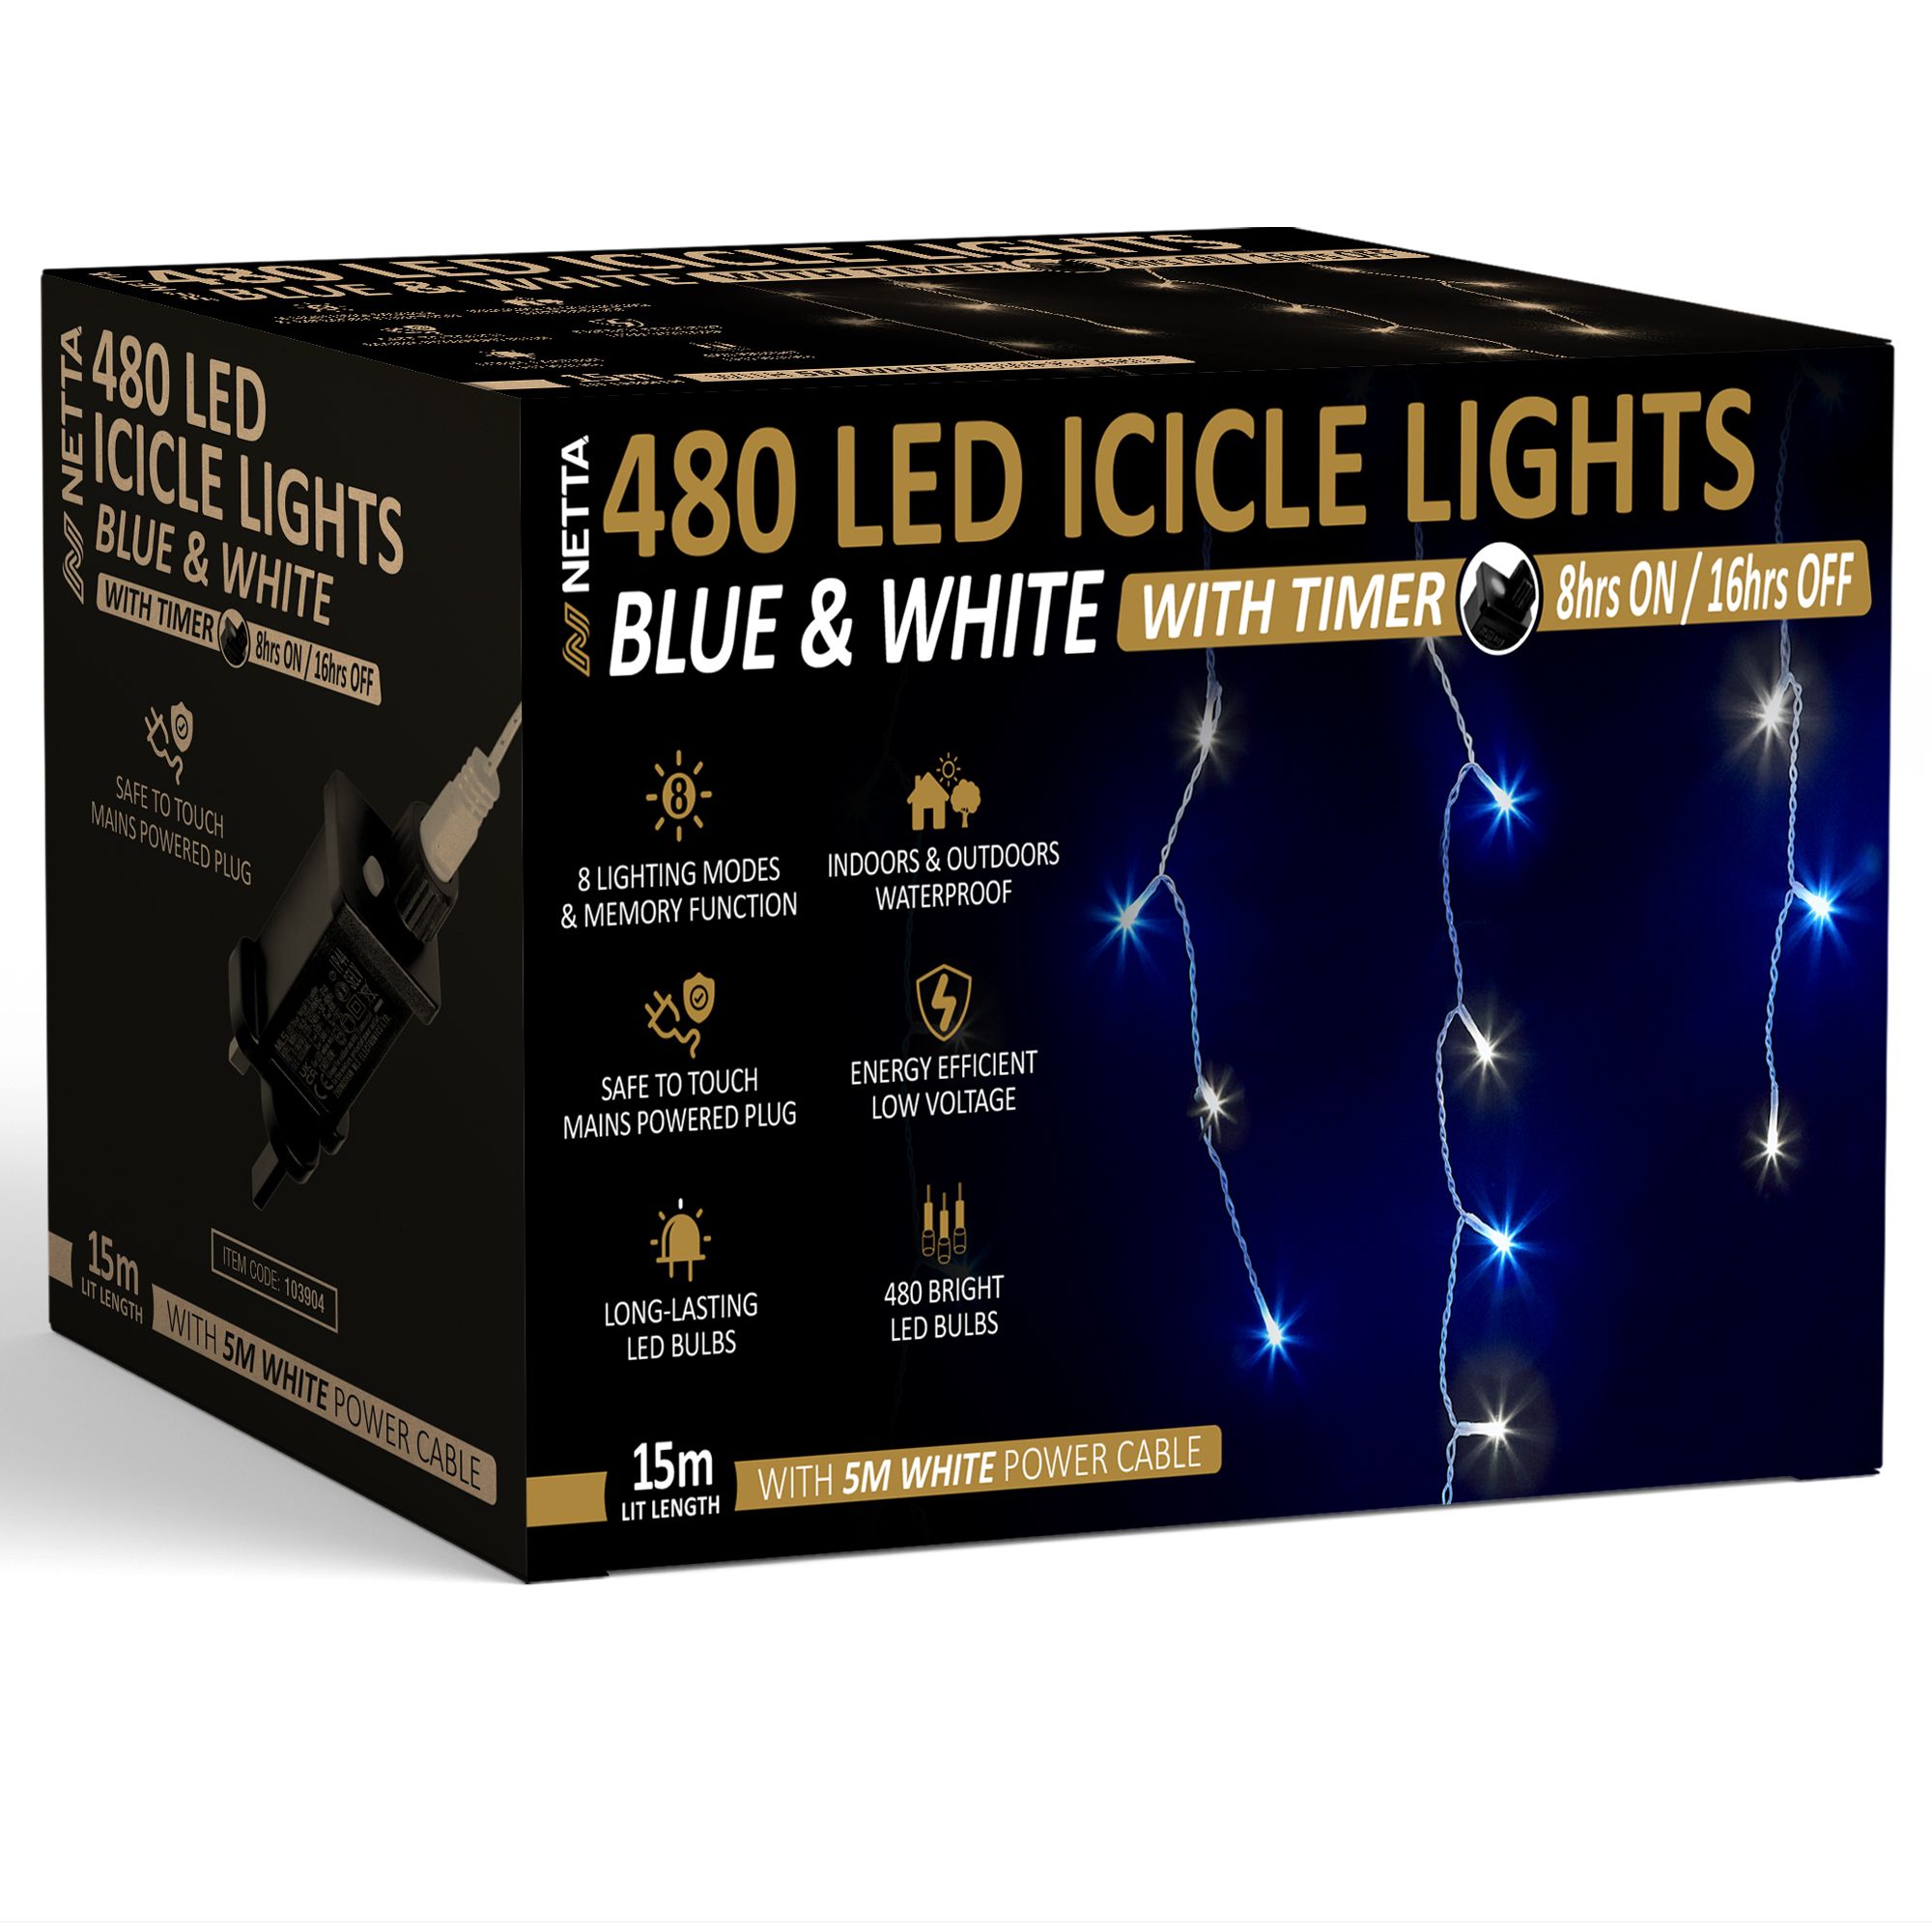 NETTA Icicle Lights 480 LED Outdoor Christmas Lights 15M Lit Length, Timer - Blue & Cool White, with White Cable